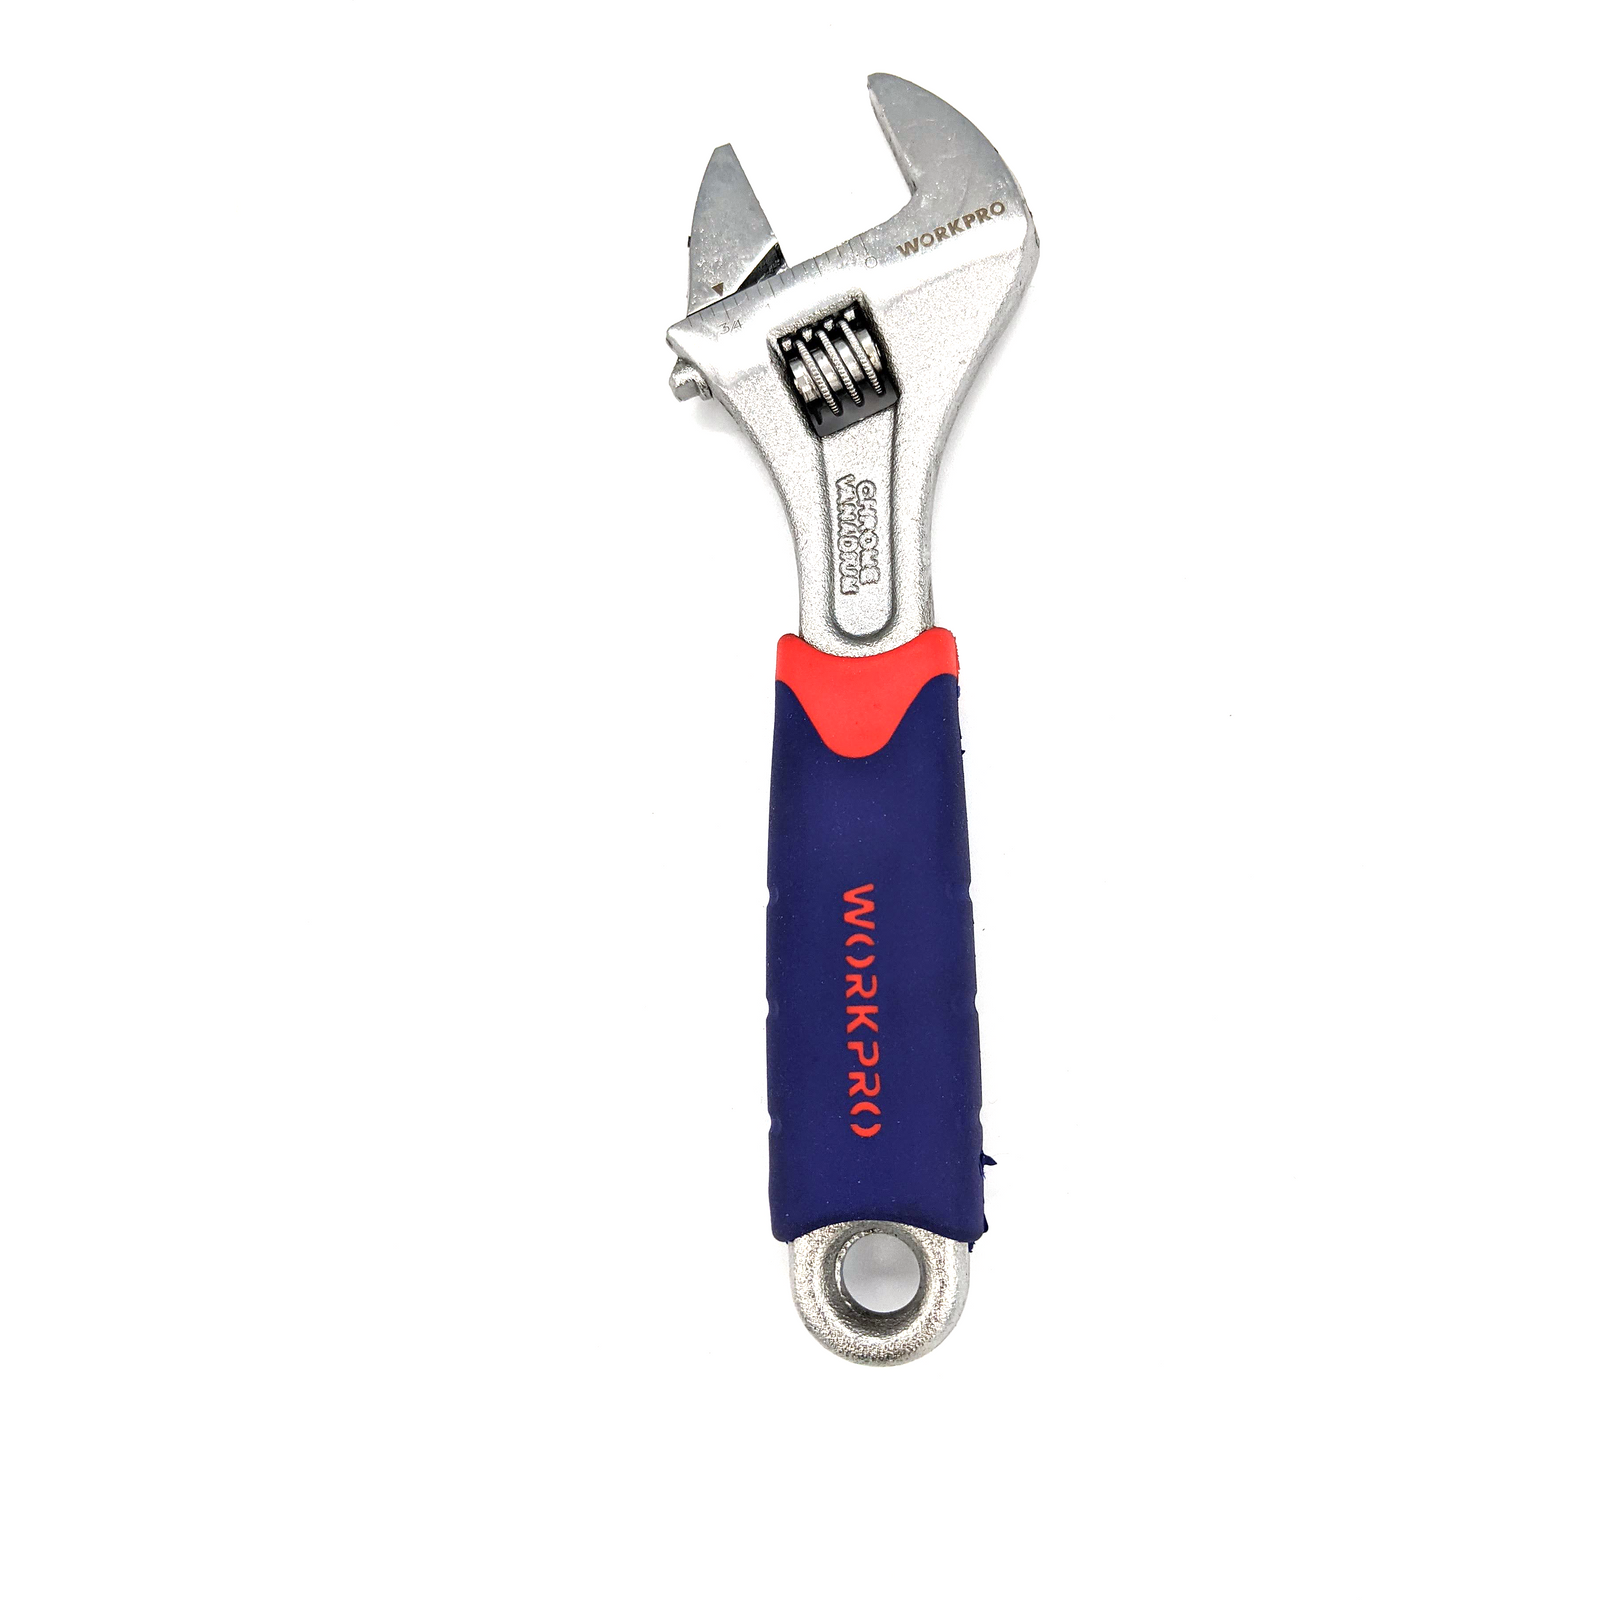 Workpro Adjustable Wrench 200Mm(8Inch)